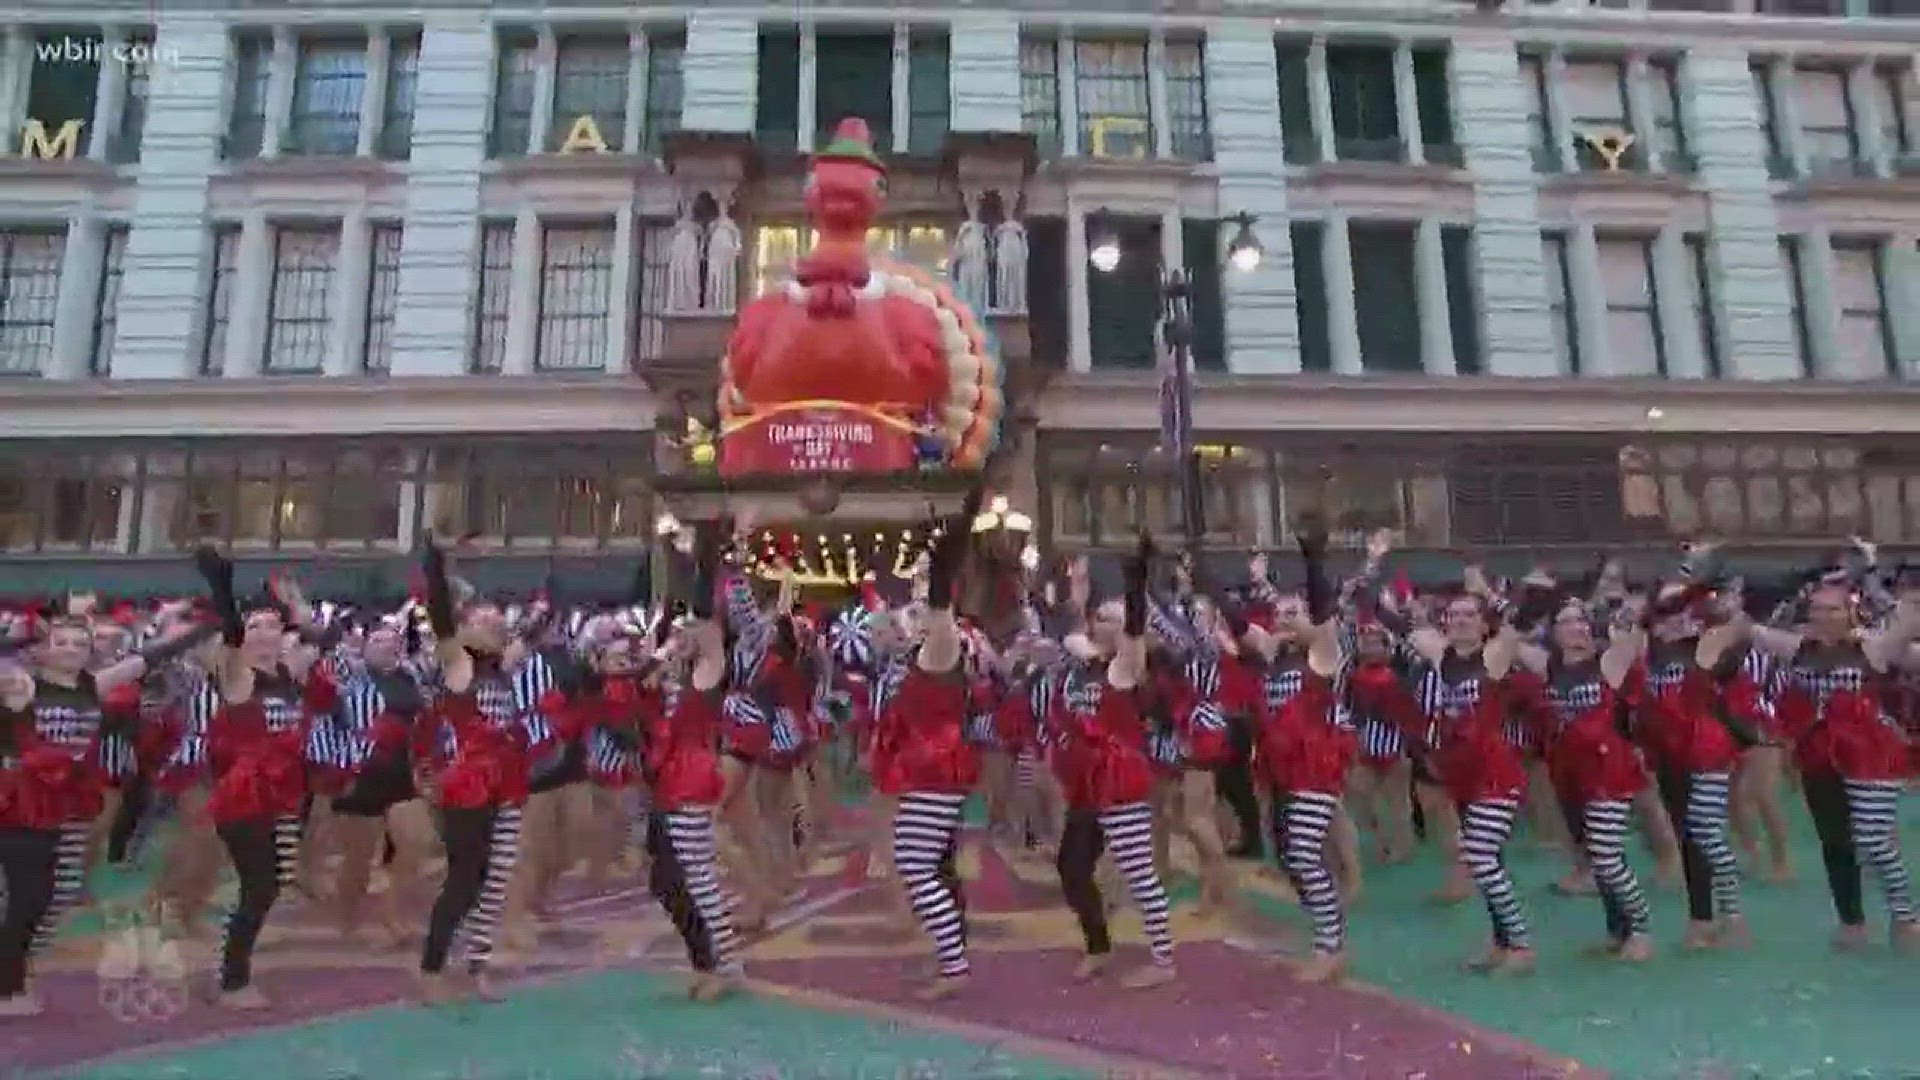 Nov. 23, 2017: Members of Clinton's Dream Dance Studio "Dream Team" represented East Tennessee in the Macy's Thanksgiving Day Parade.